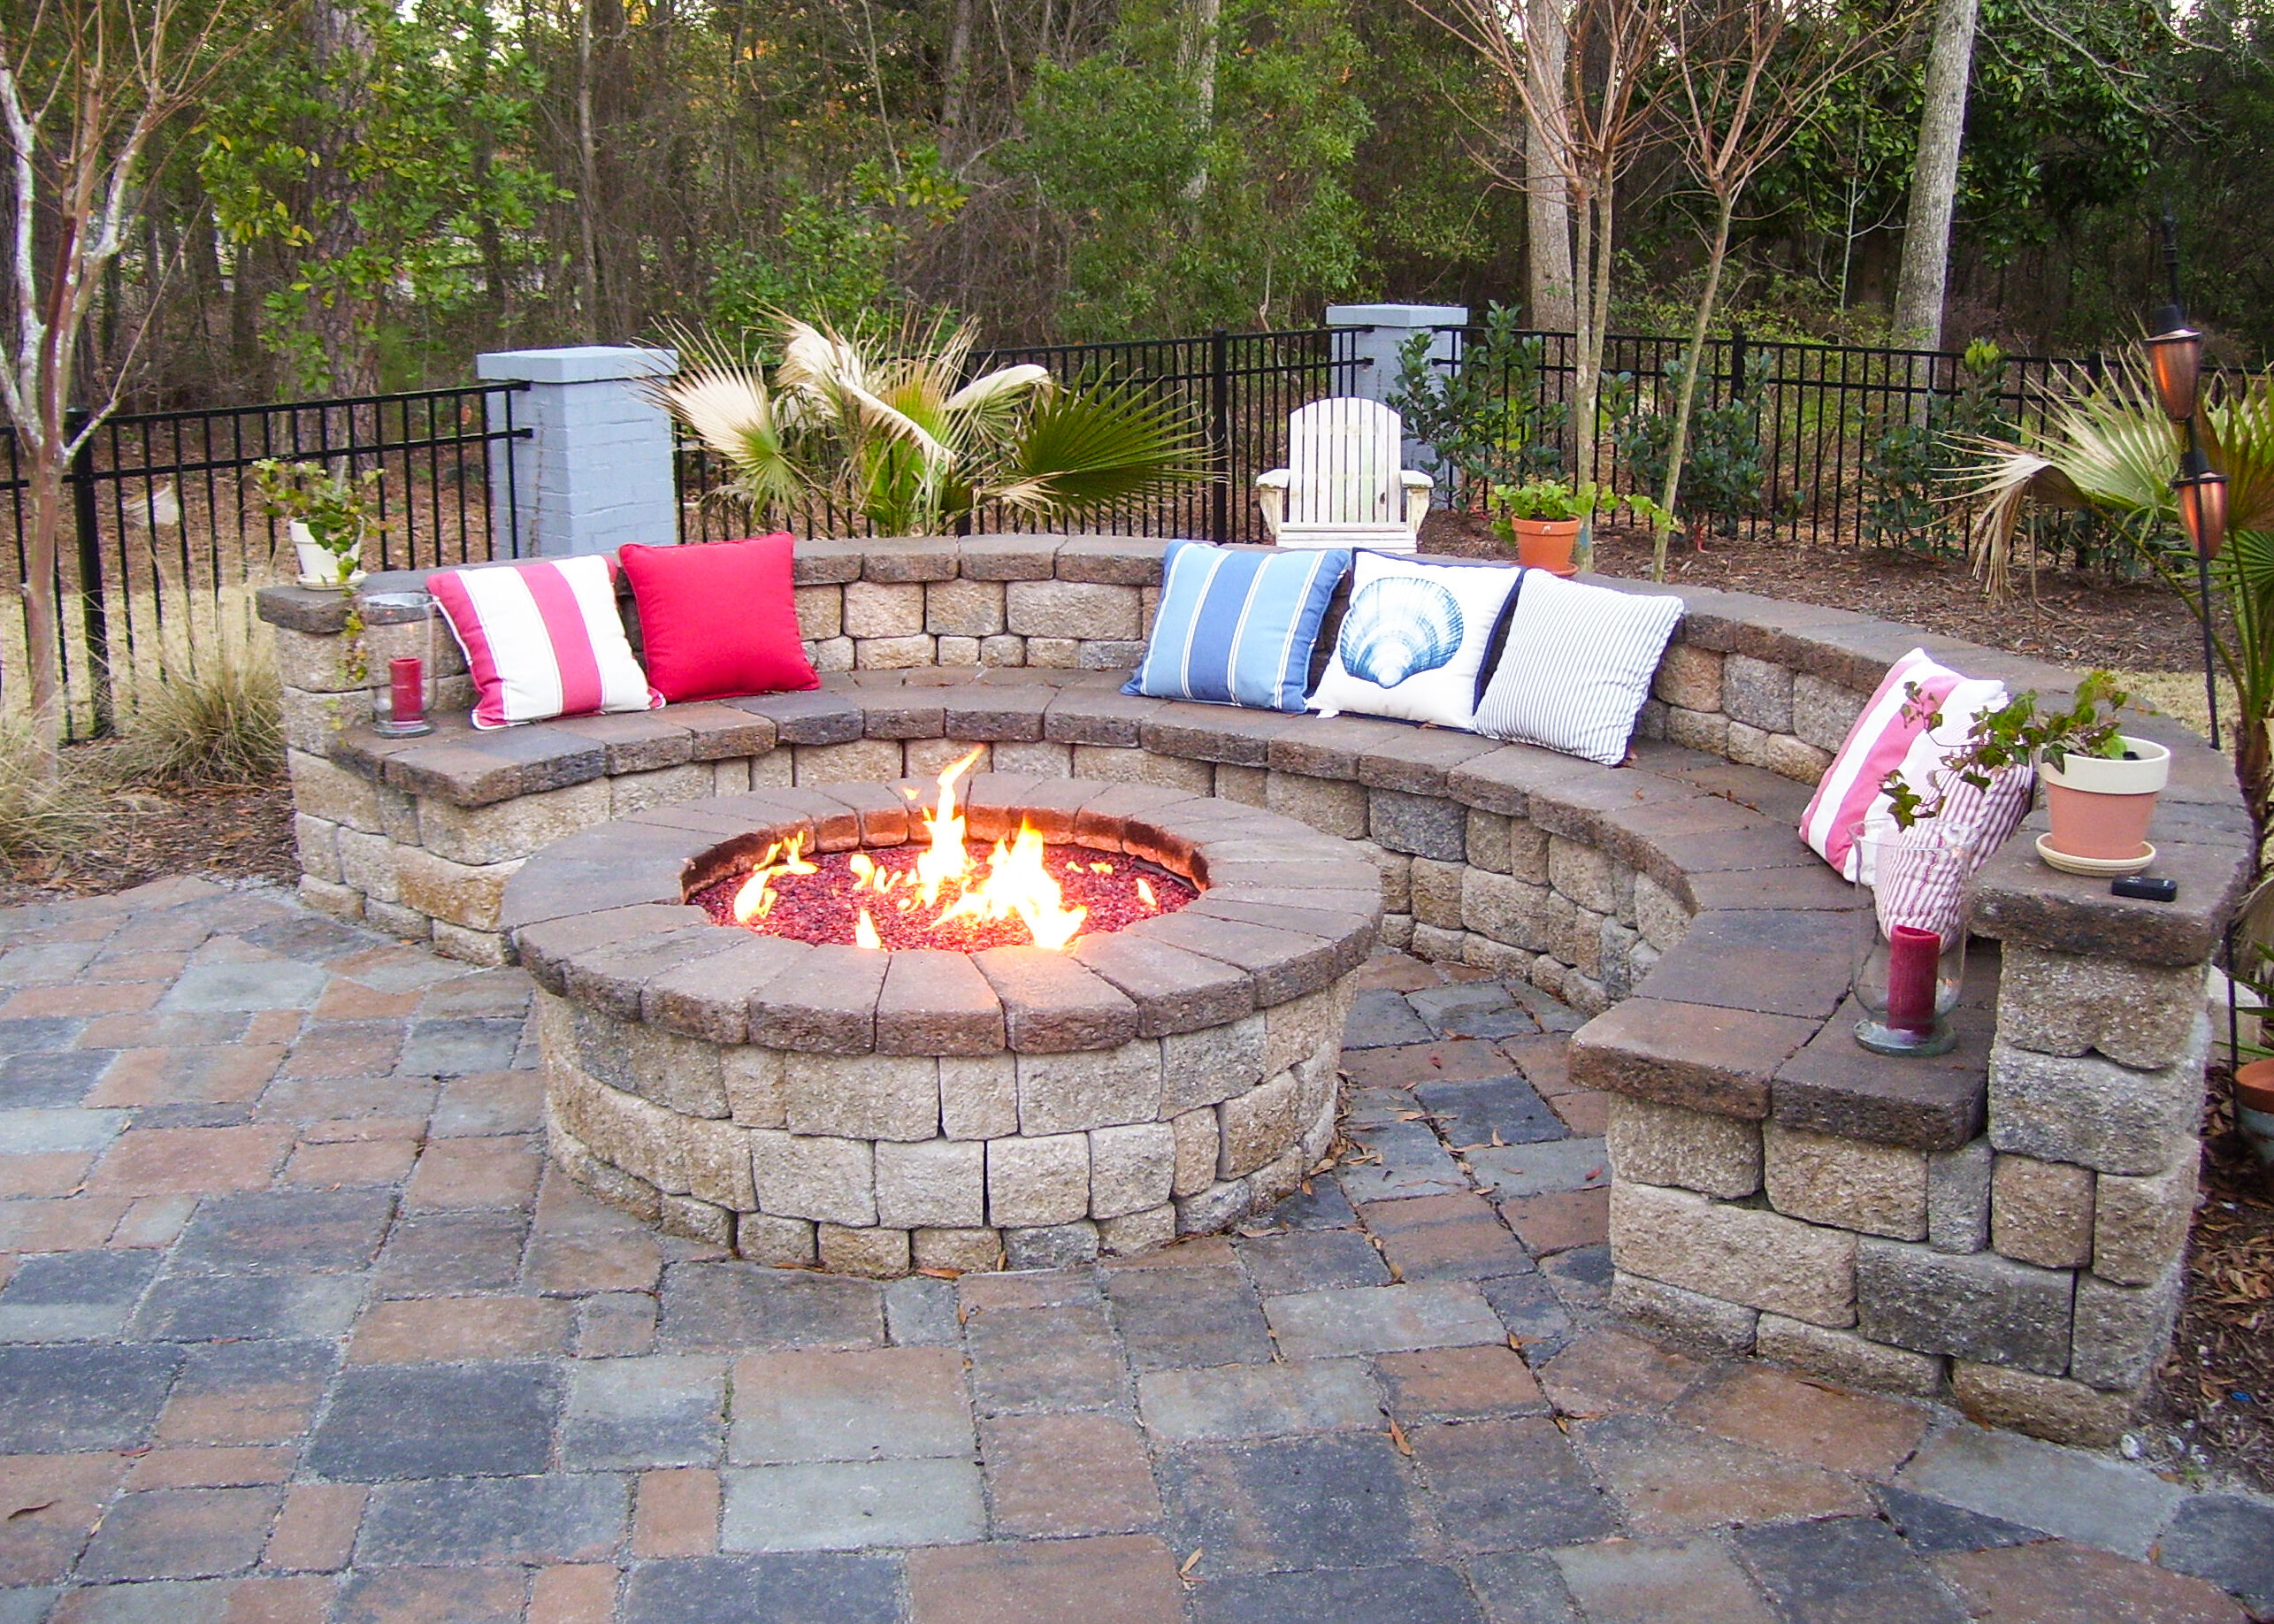 3 Easy Diy Fire Pit Ideas, How To Make A Yard Fire Pit